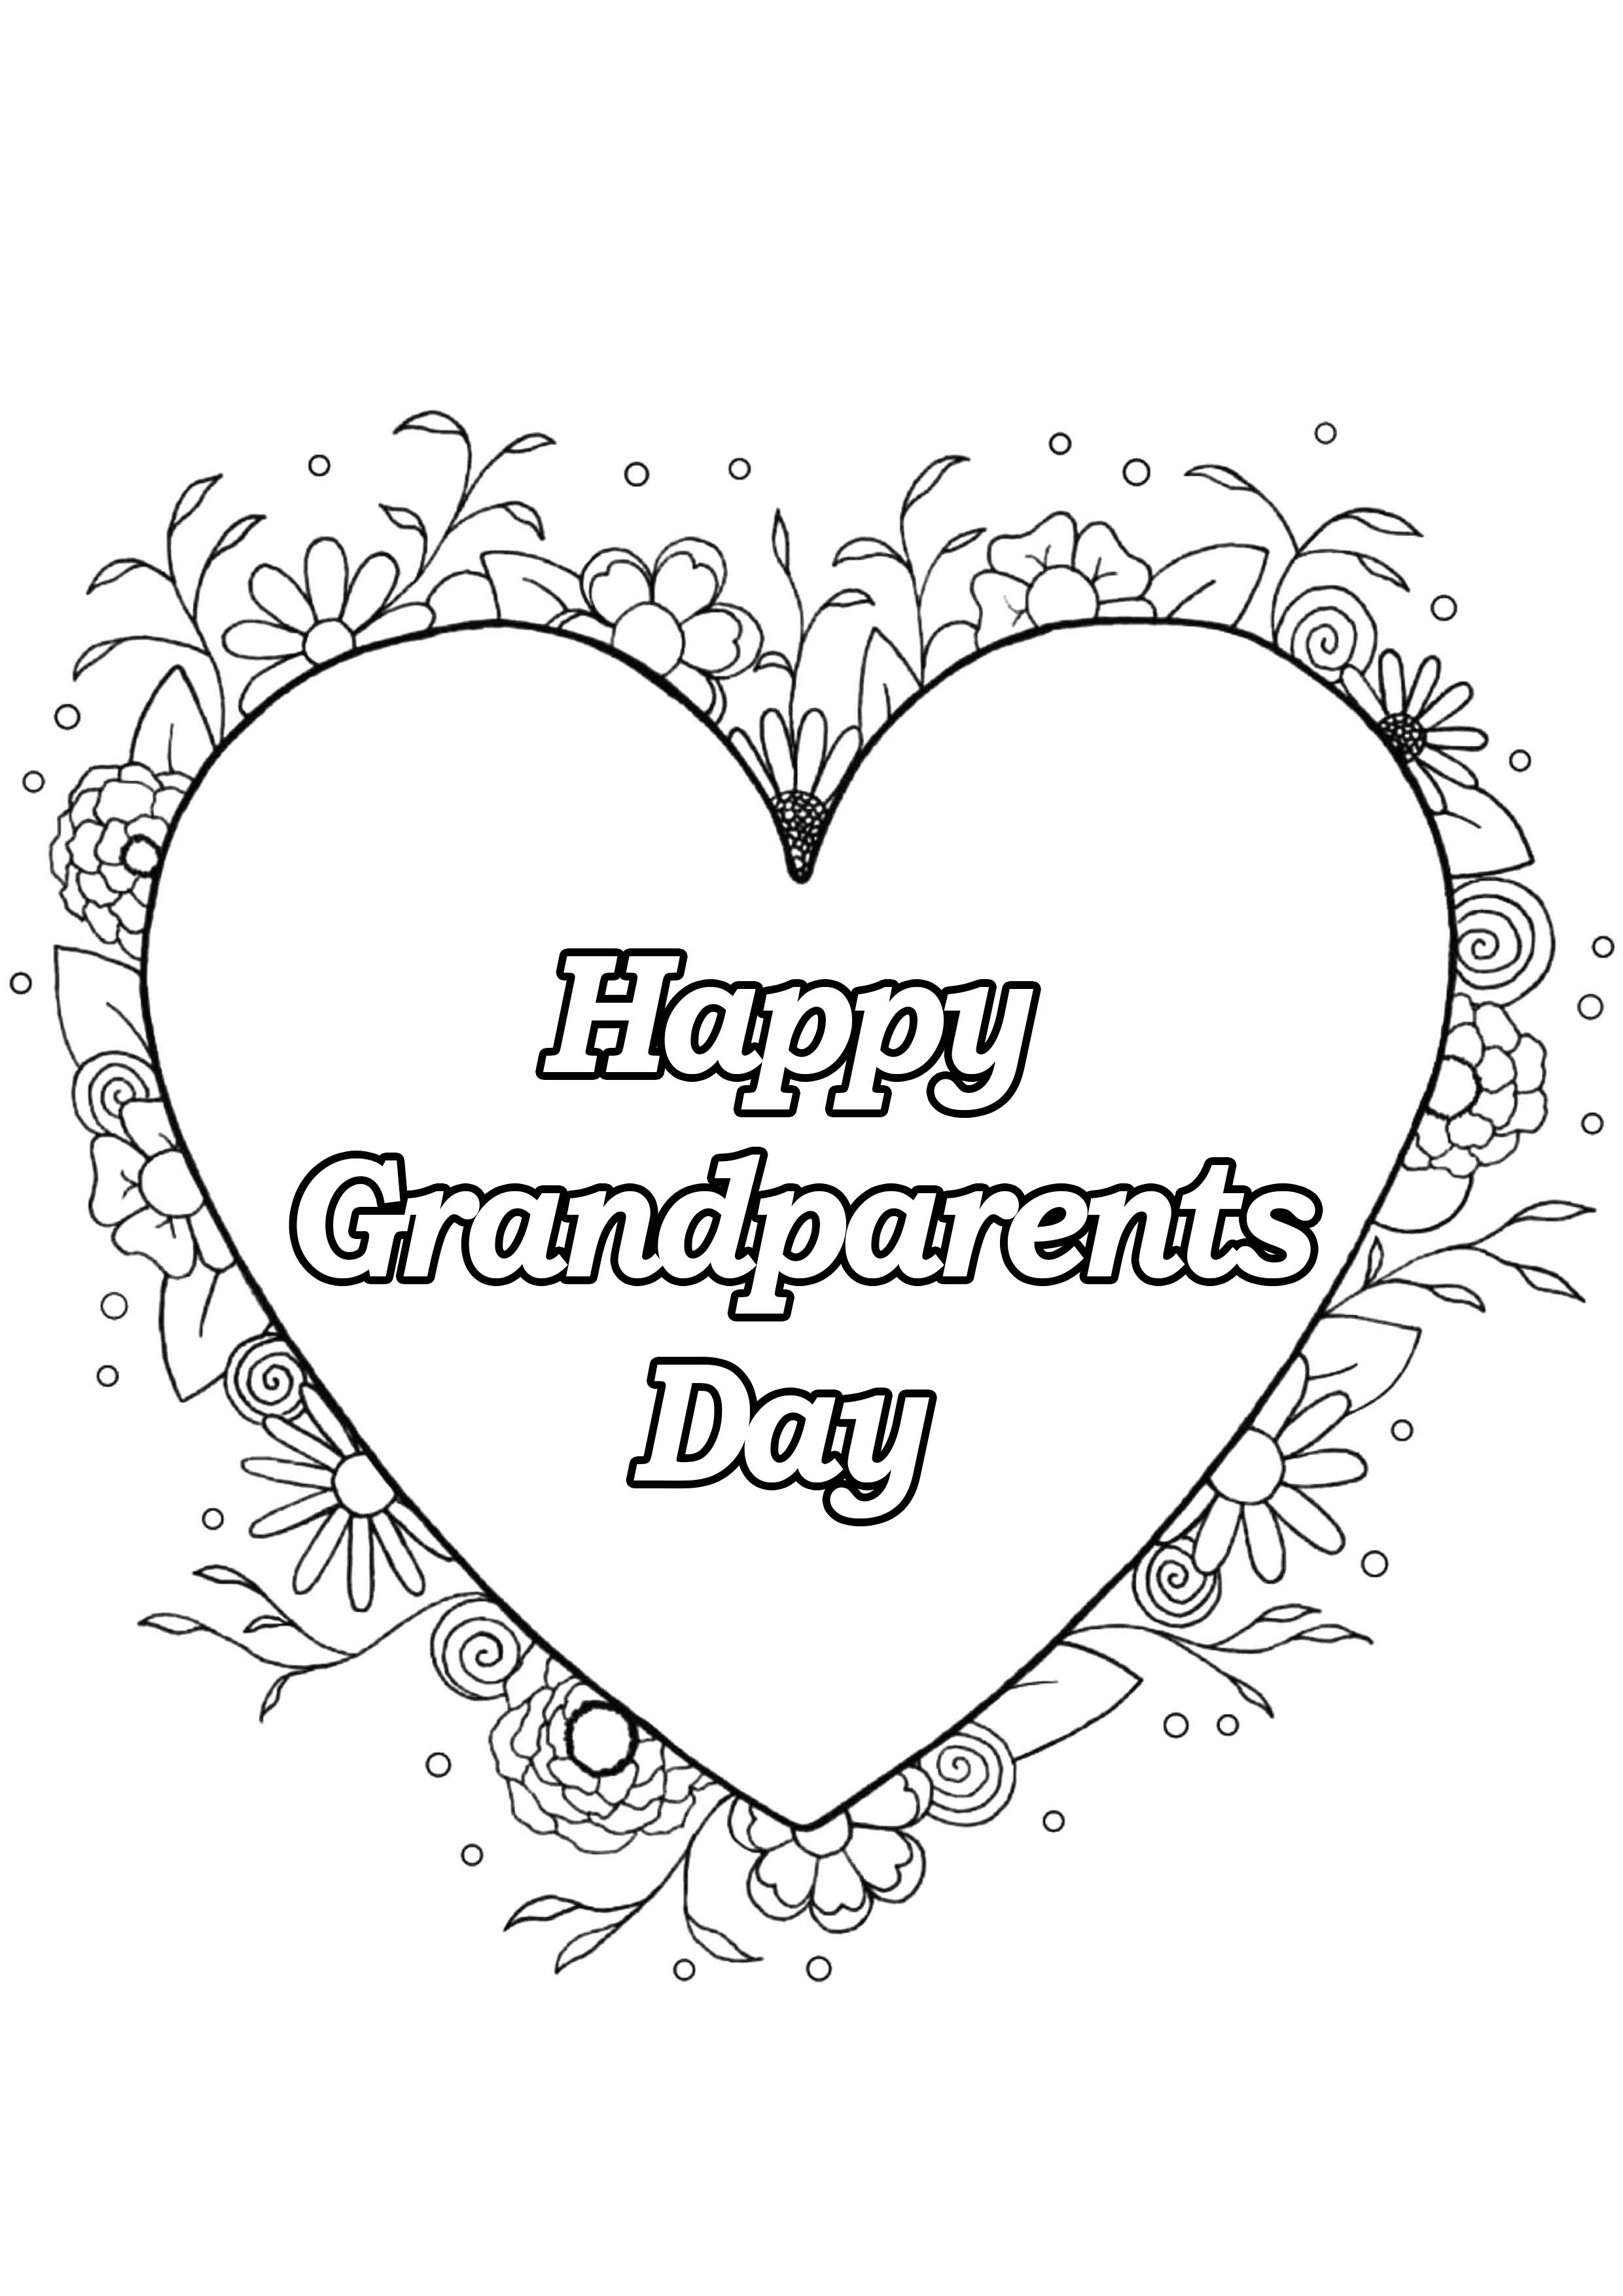 Grandparents day 4 Gr&parents Day Adult Coloring Pages